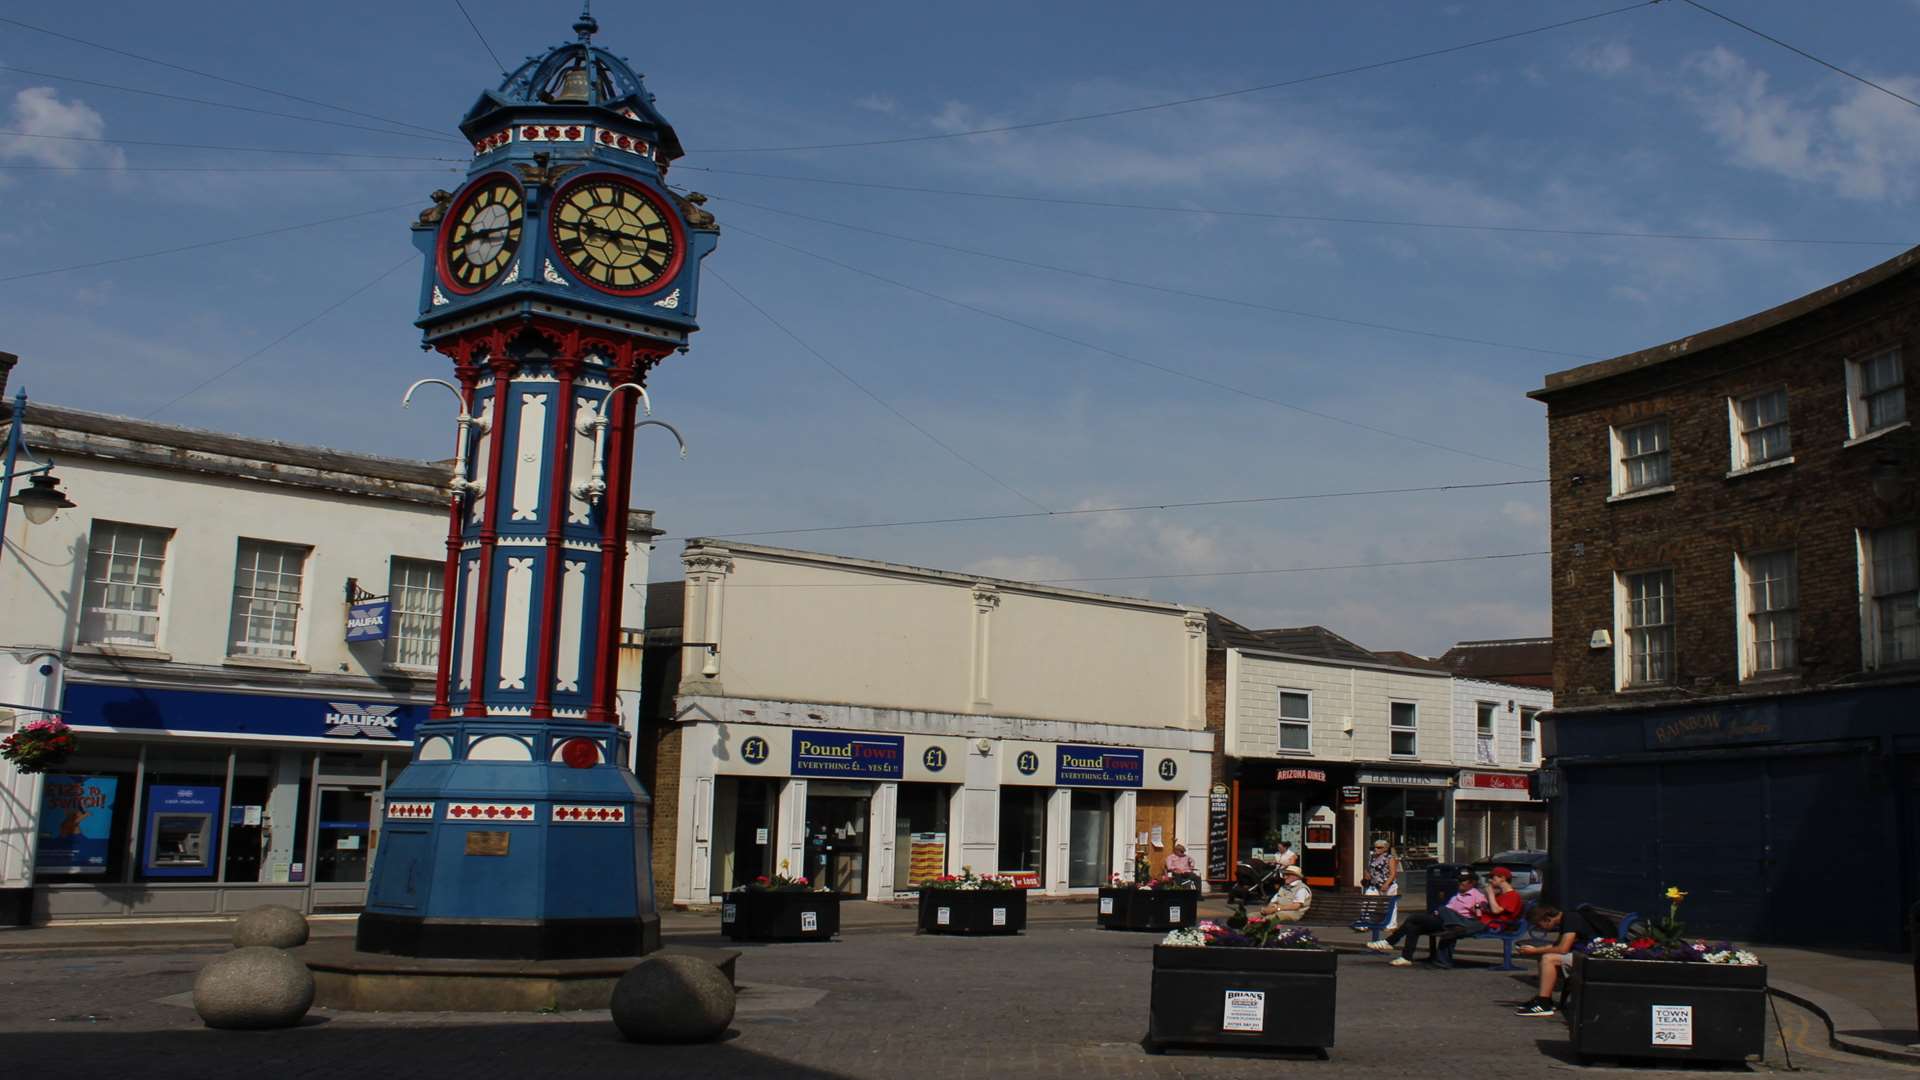 Sheerness is bidding for its own town council